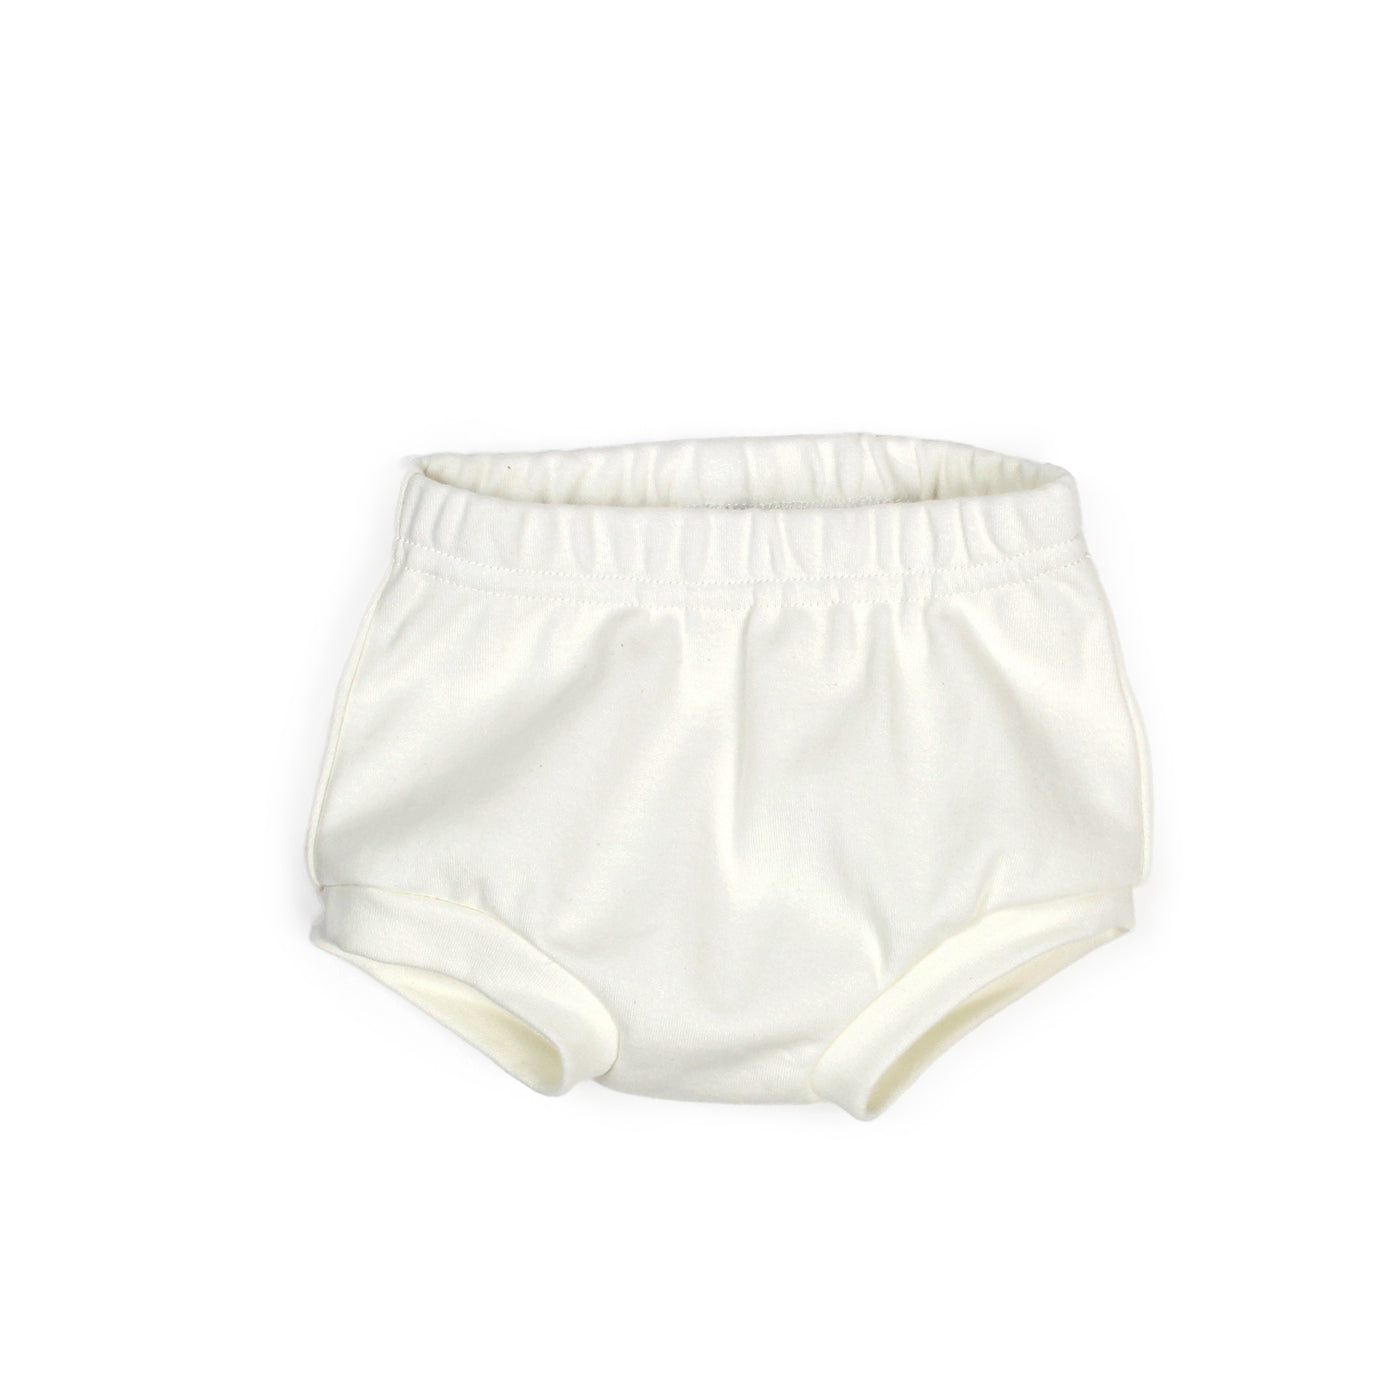 AguKids bloomers size 0-3 months